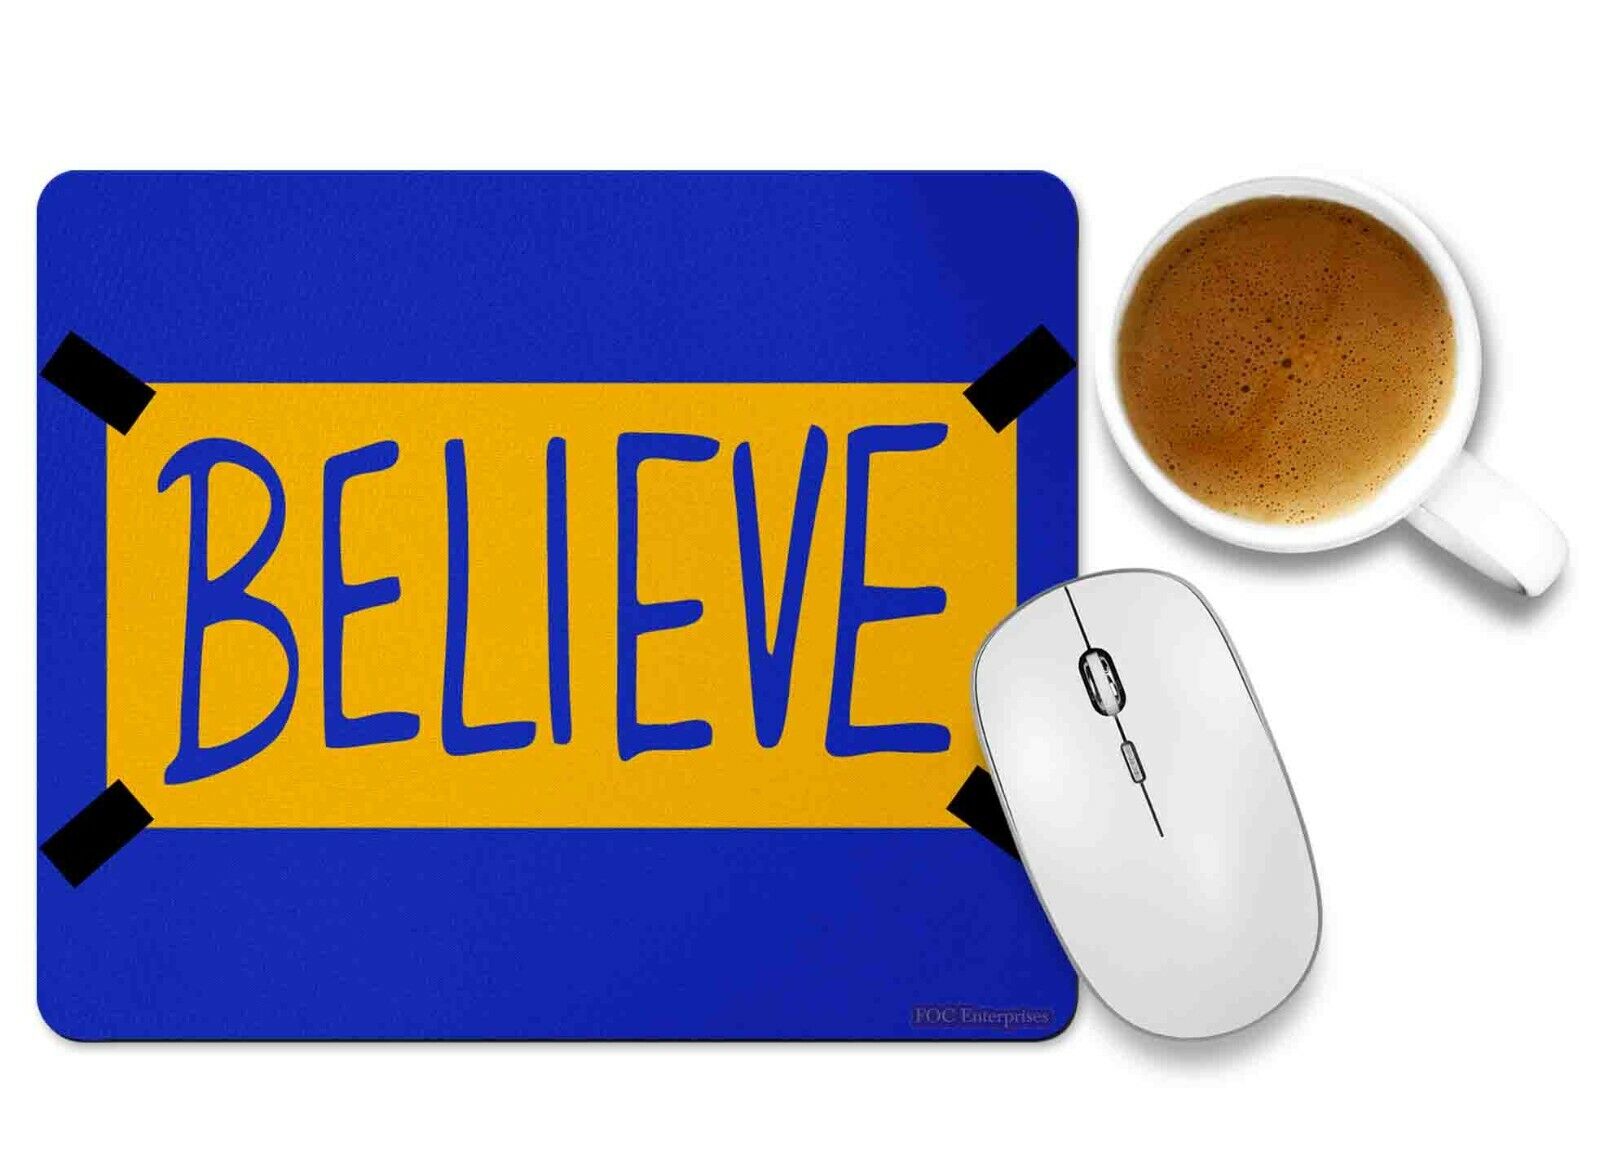 BELIEVE Sign Mouse pad Non-Slip Rubber Base Rectangle Gaming Mousepad For Laptop